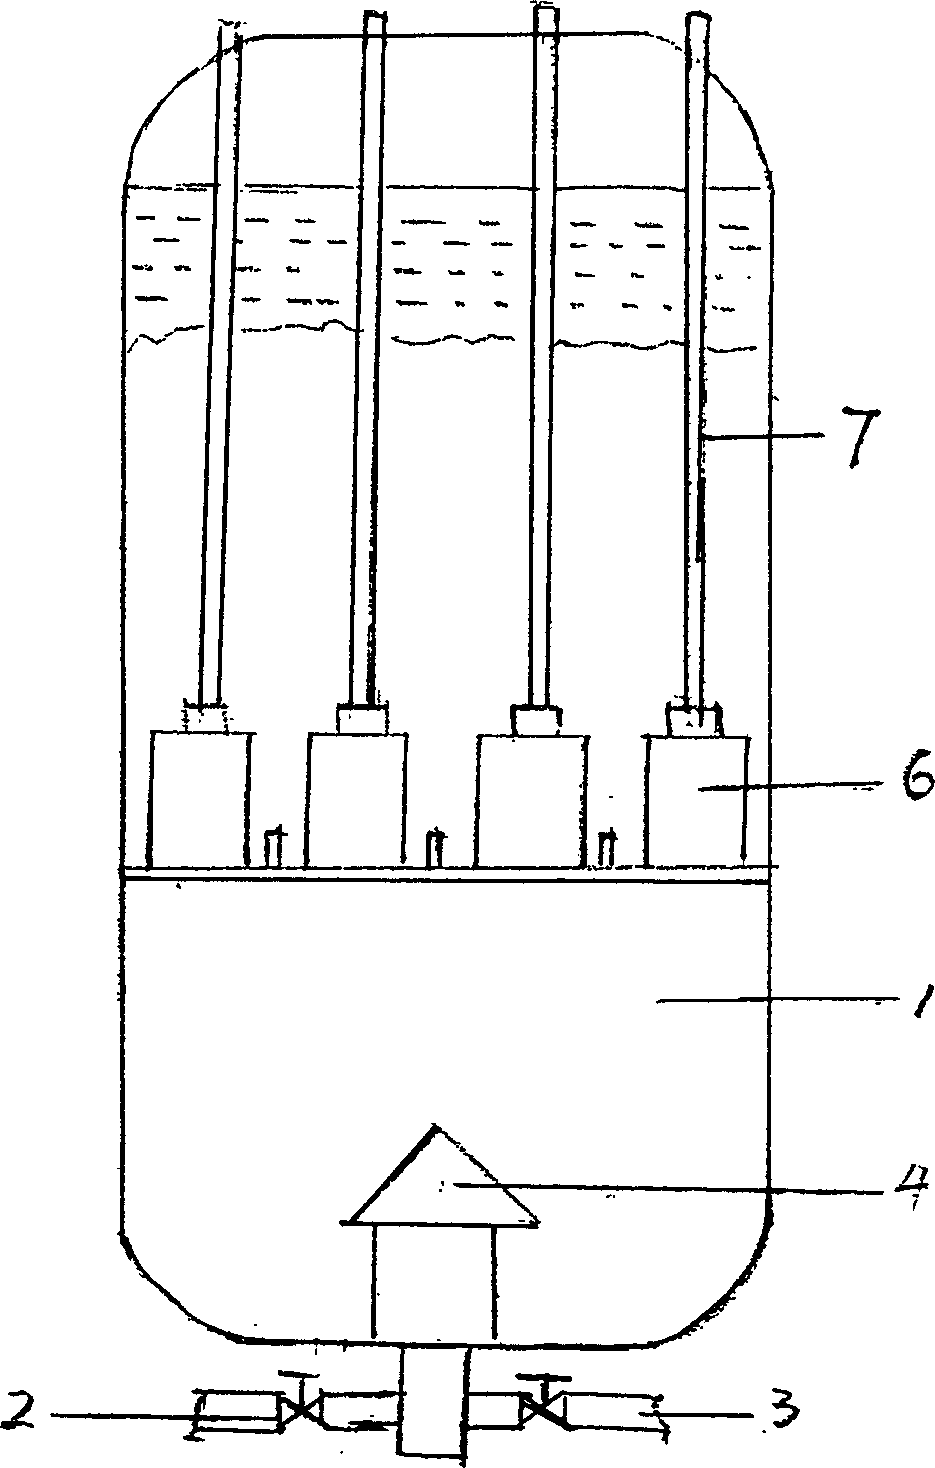 Process for producing nano calcium carbonate by ultrasonic cavitation technology